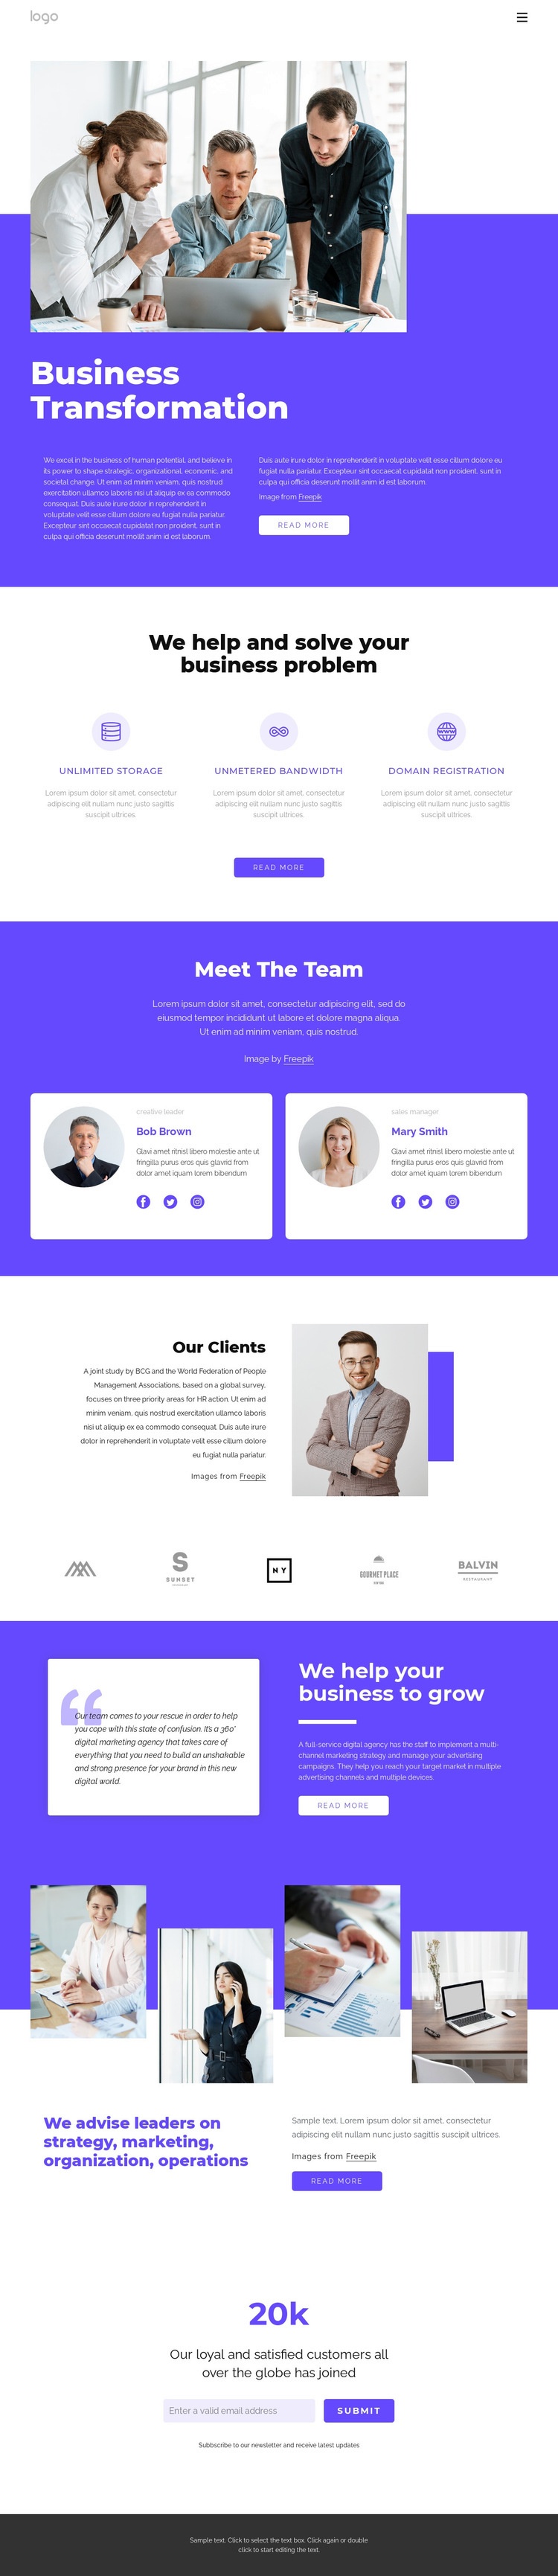 Global management consulting firm Web Page Design